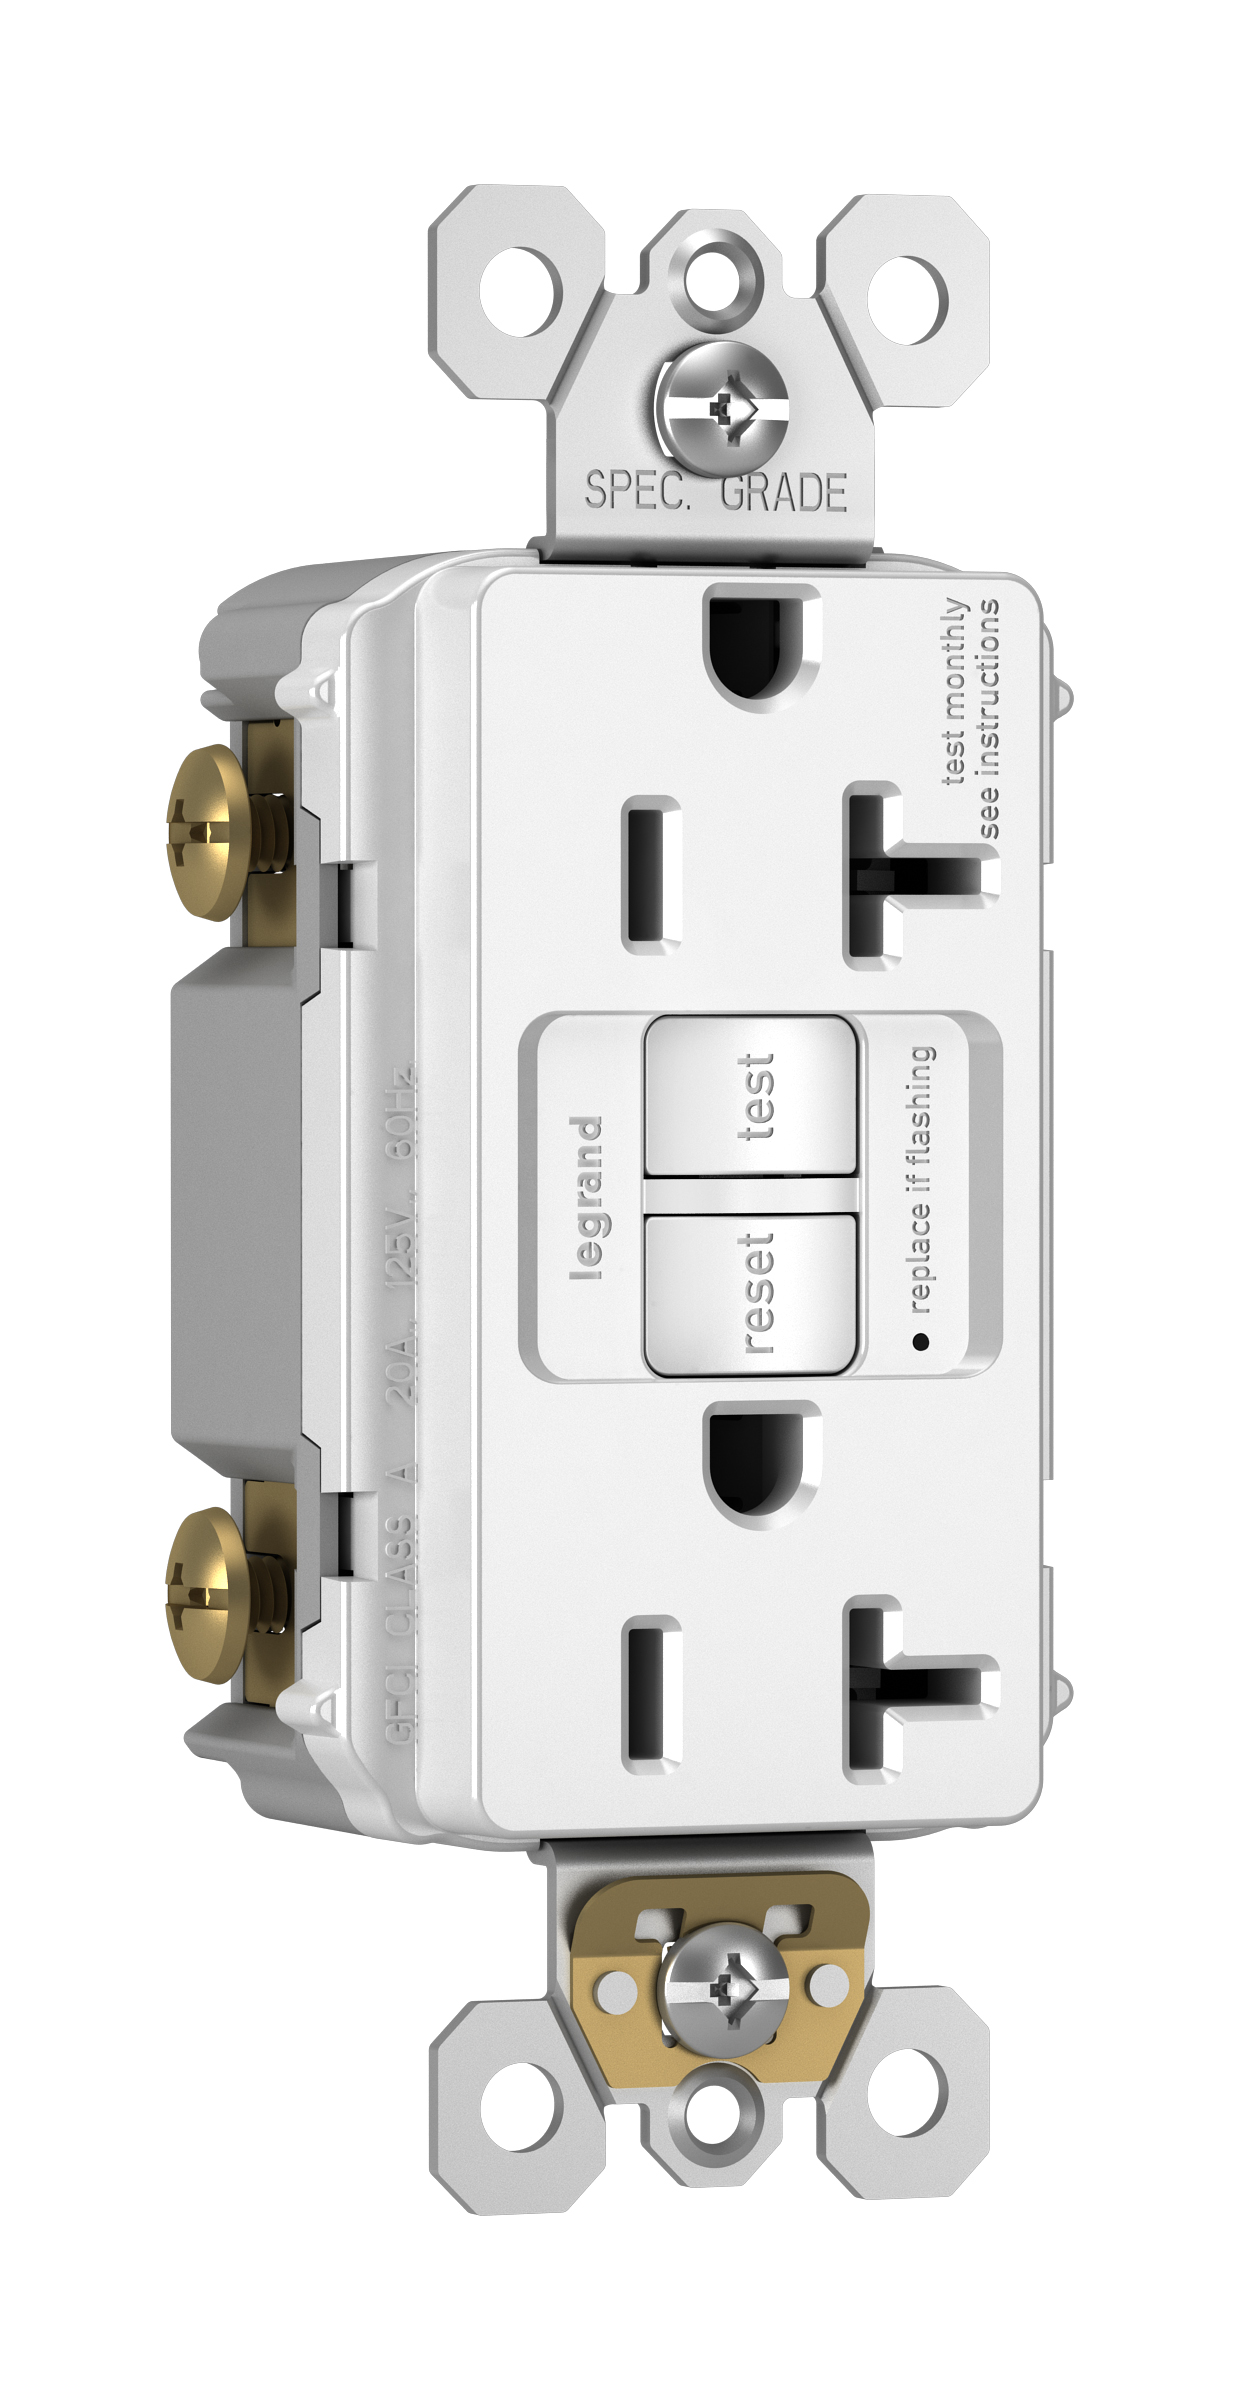 Legrand Ivory Pass & Seymour radiant 1597ICC10 15 Amp Self-Test GFCI Safety Outlet Matching Wall Plate Included Legrand-Pass & Seymour